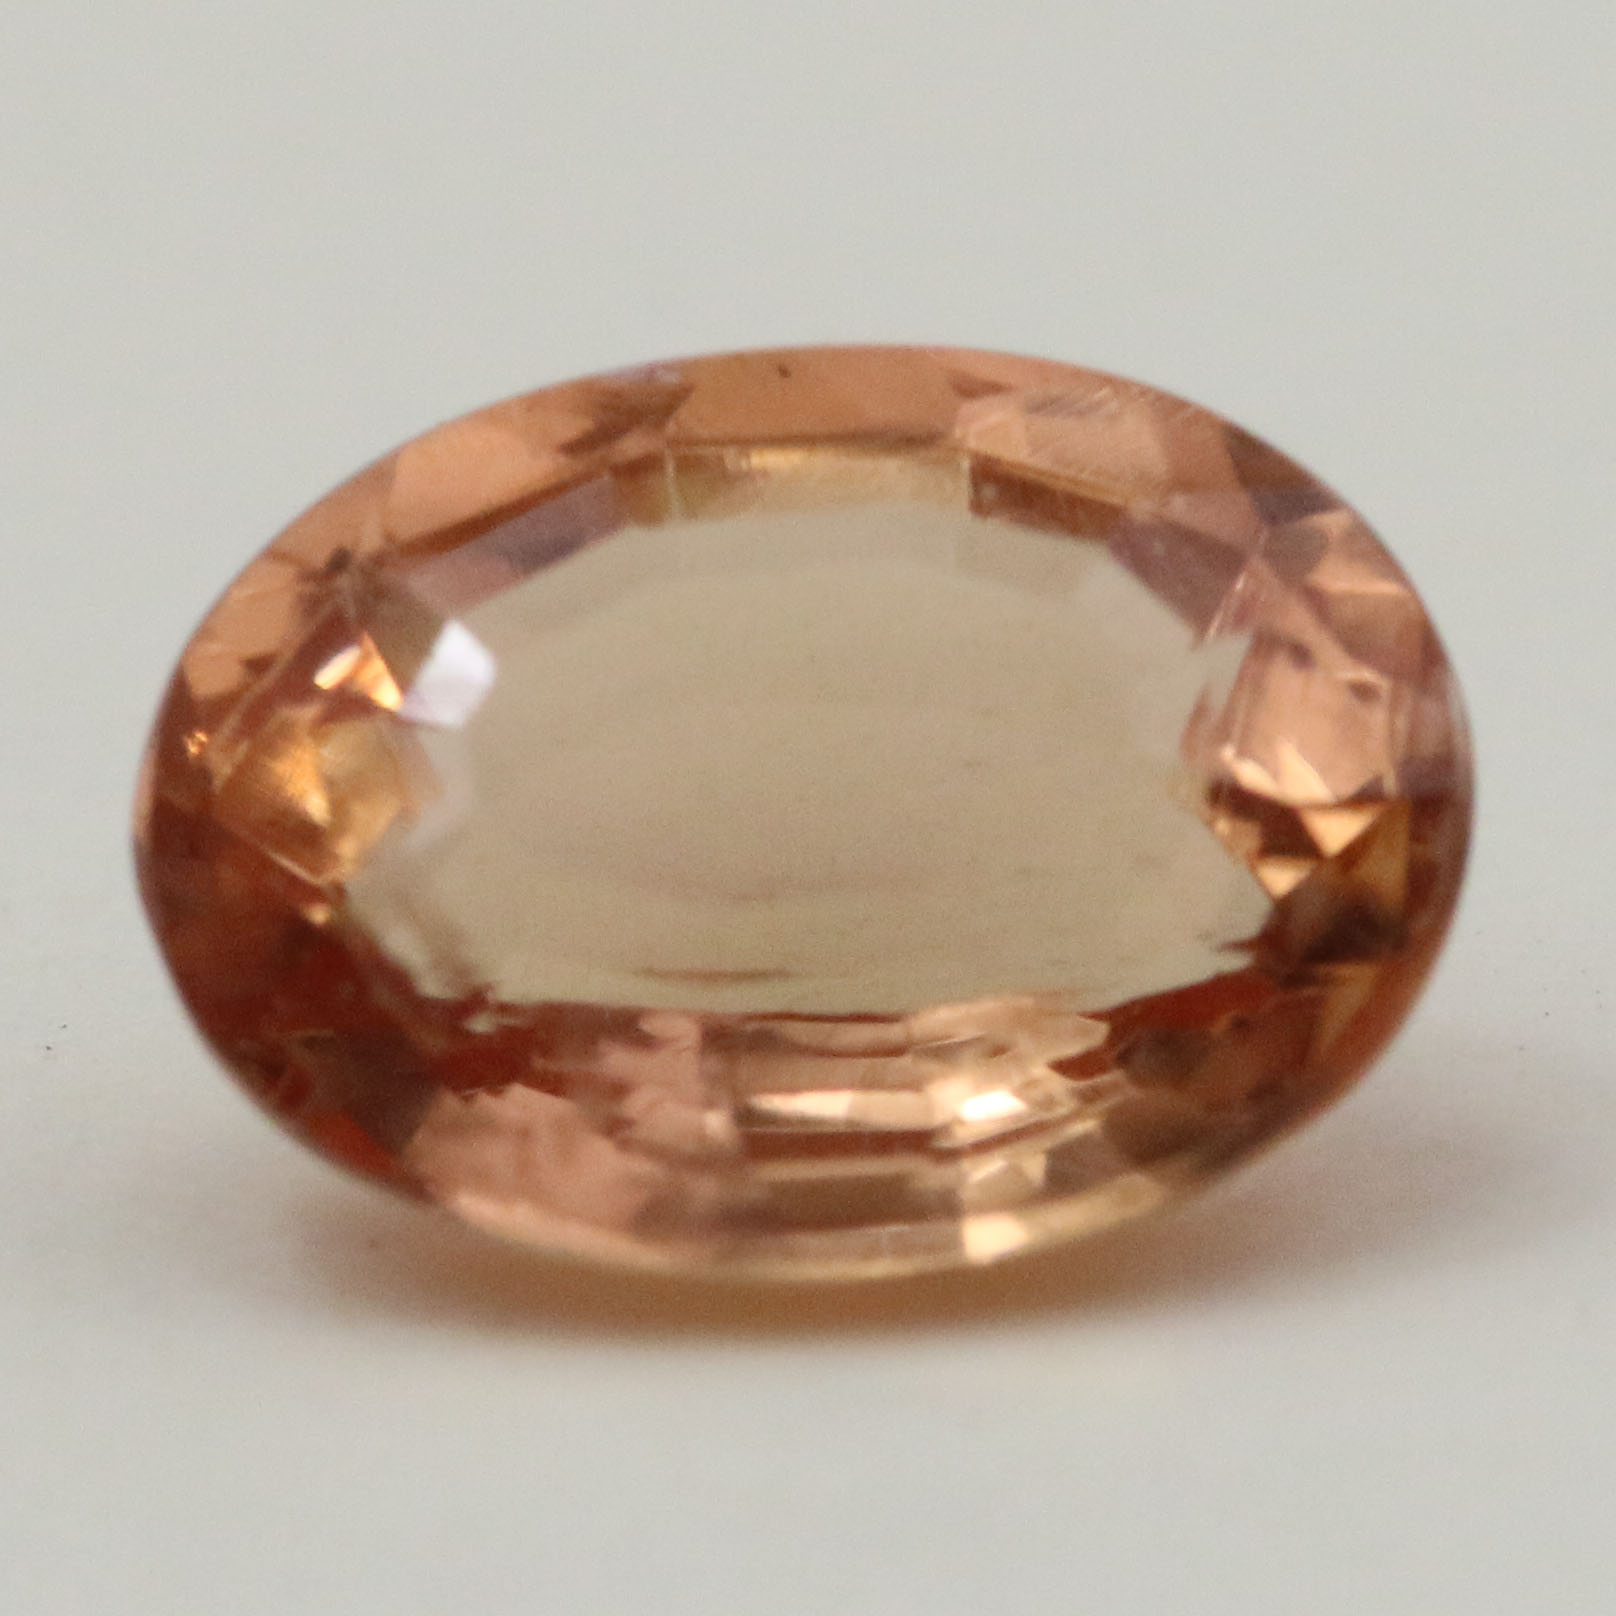 ANDALUSITE 9X6.8 OVAL 2.2CT